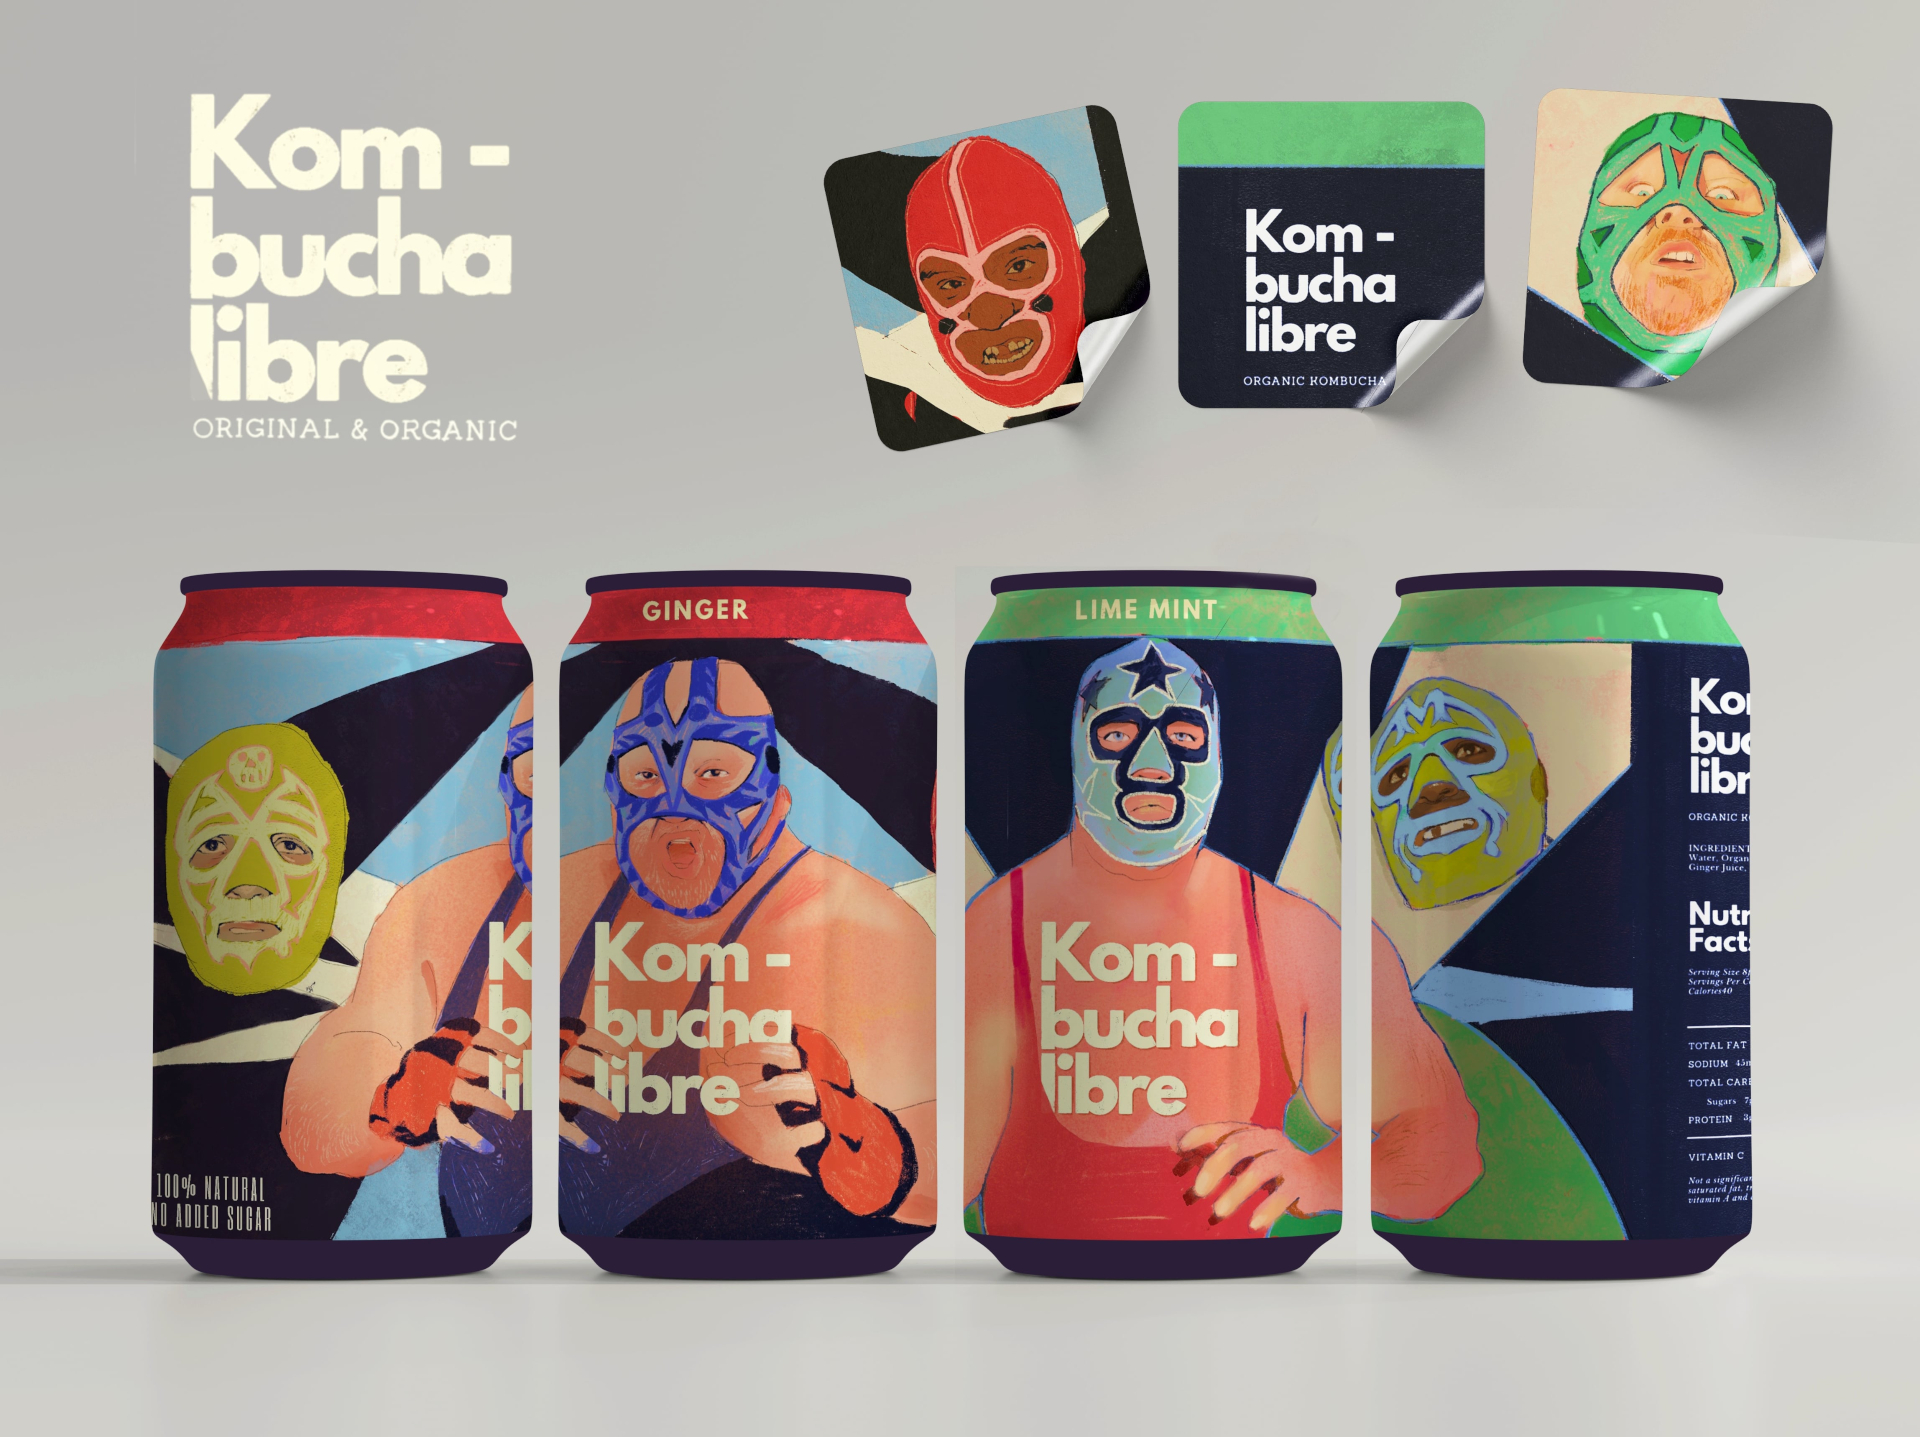 Kombucha libre. Kom-bucha libre is a play on words combining freestyle wrestling (lucha libre) with organic kombucha. I was inspired by the colourful masks and costumes of luchadores (masked wrestlers) and wanted to create a packaging design that would encapsulate the figures in a playful way. My main focus was to explore the potential of design through colours, shapes and illustrated characters.